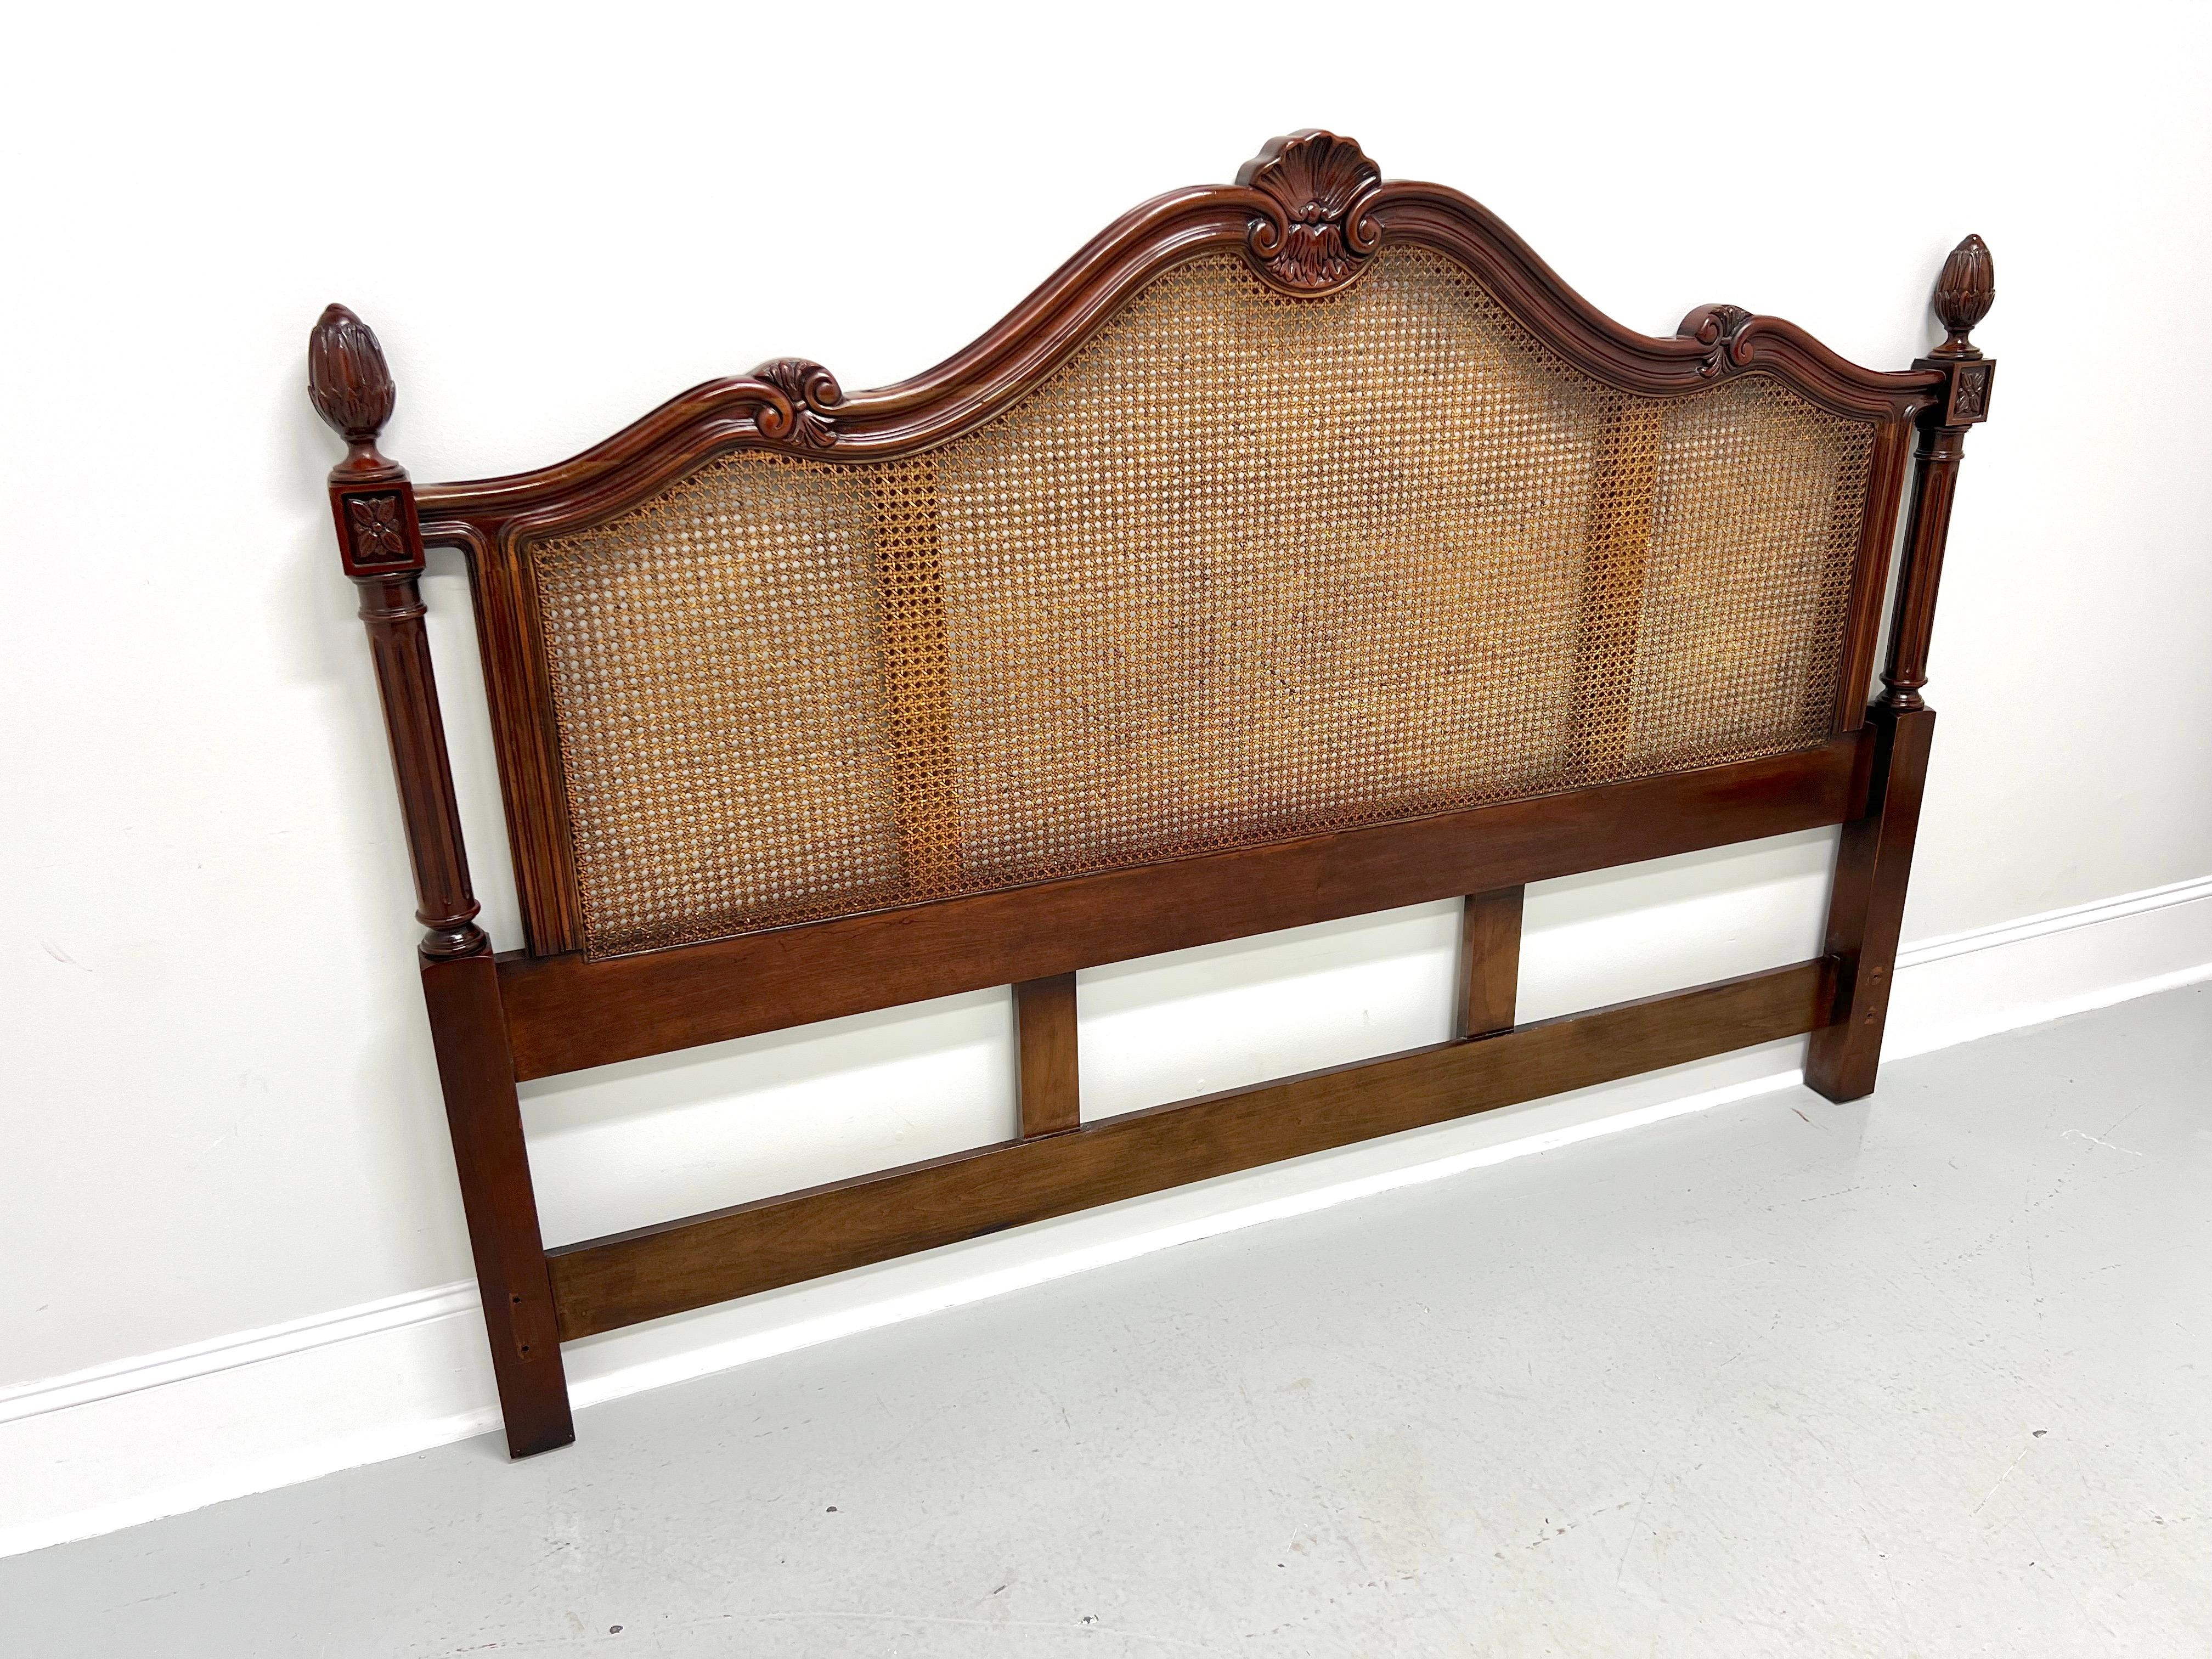 An Italian Provincial style king size headboard by Century Furniture, from their Cardella Collection. Cherry wood frame, decoratively carved, arched top with center carved shell, center inset with caning, low posts at sides with fluted columns and